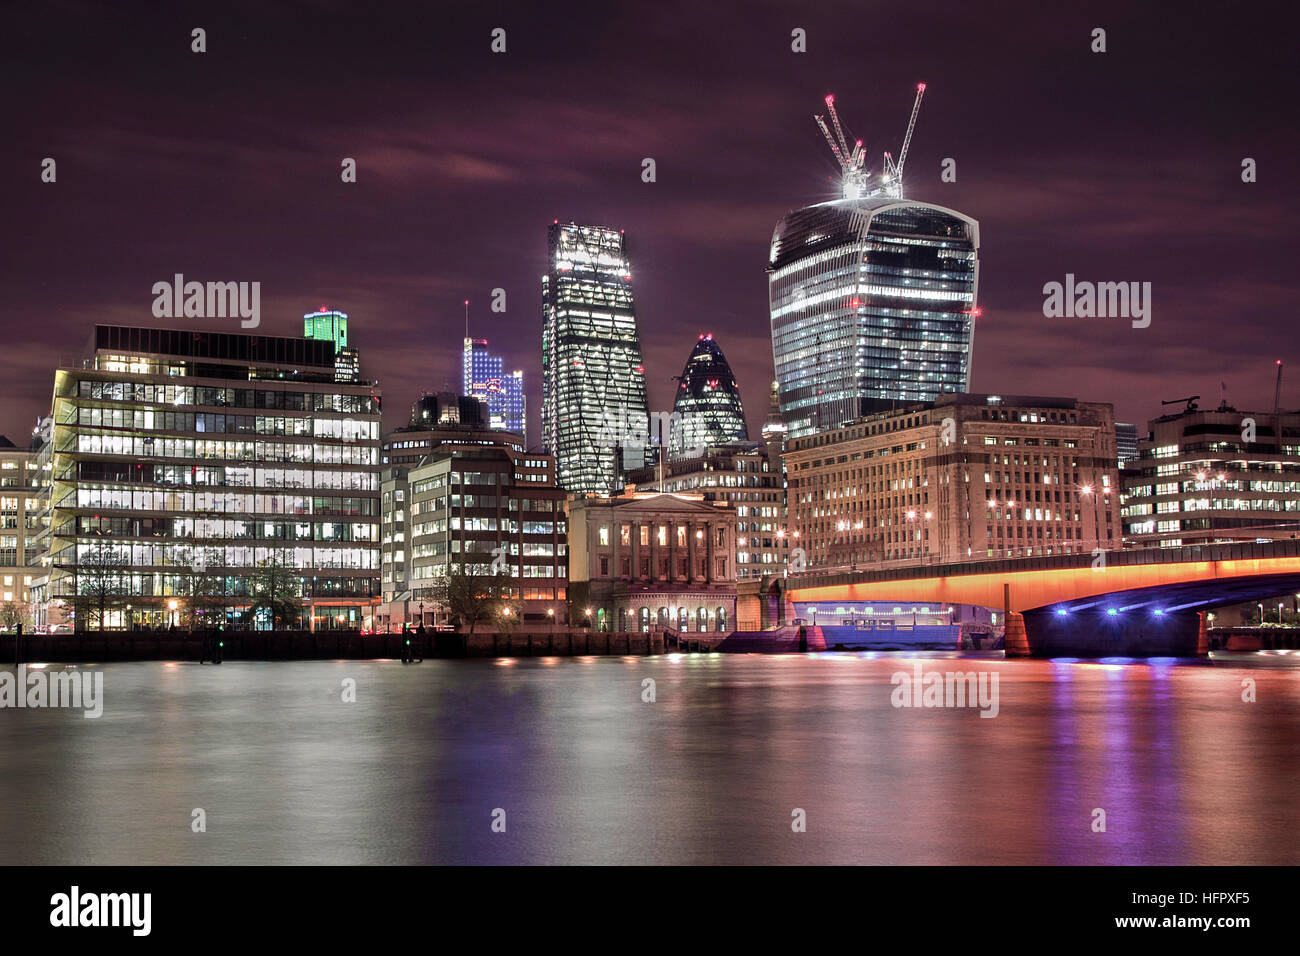 Towers of London - Walkie Talkie, Gerkin and Cheesegrater! Stock Photo